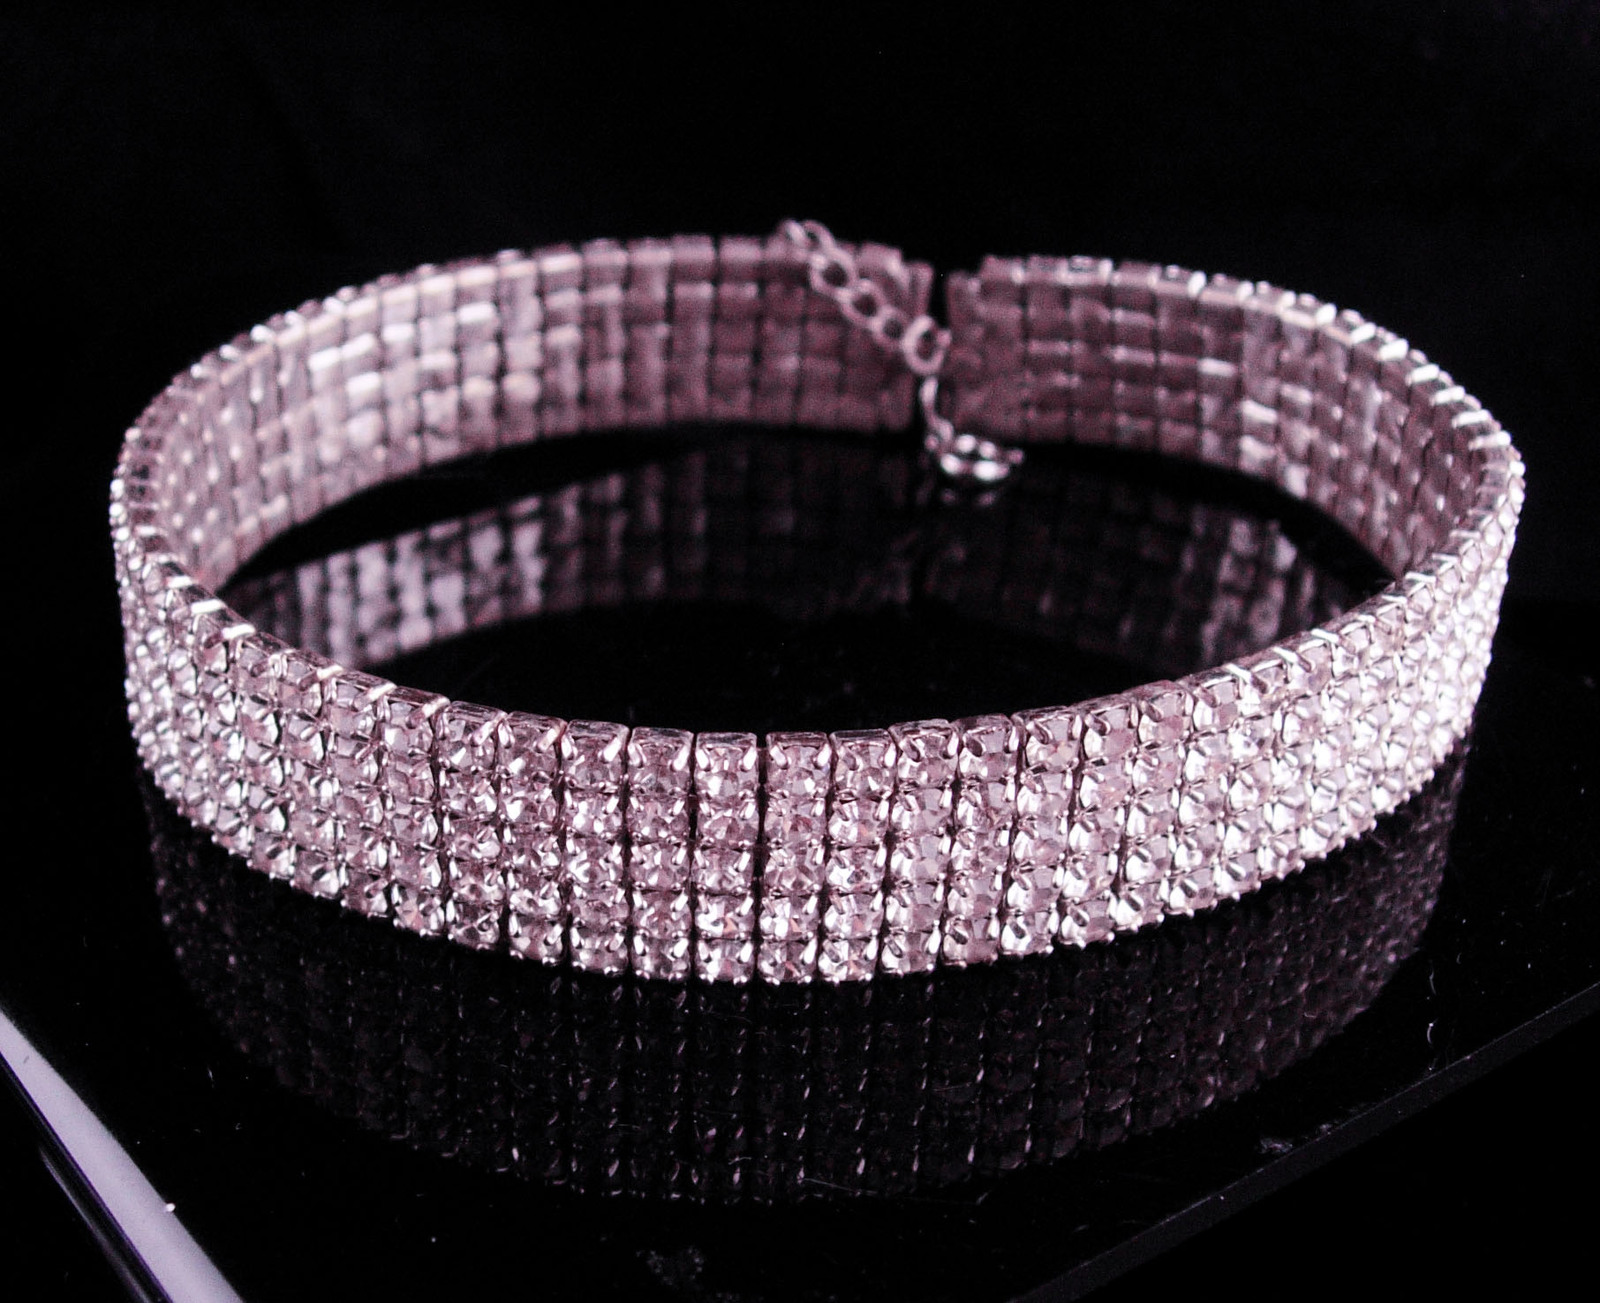 Primary image for Vintage collar rhinestone Choker - coiled necklace - 5 row flexible necklace - D